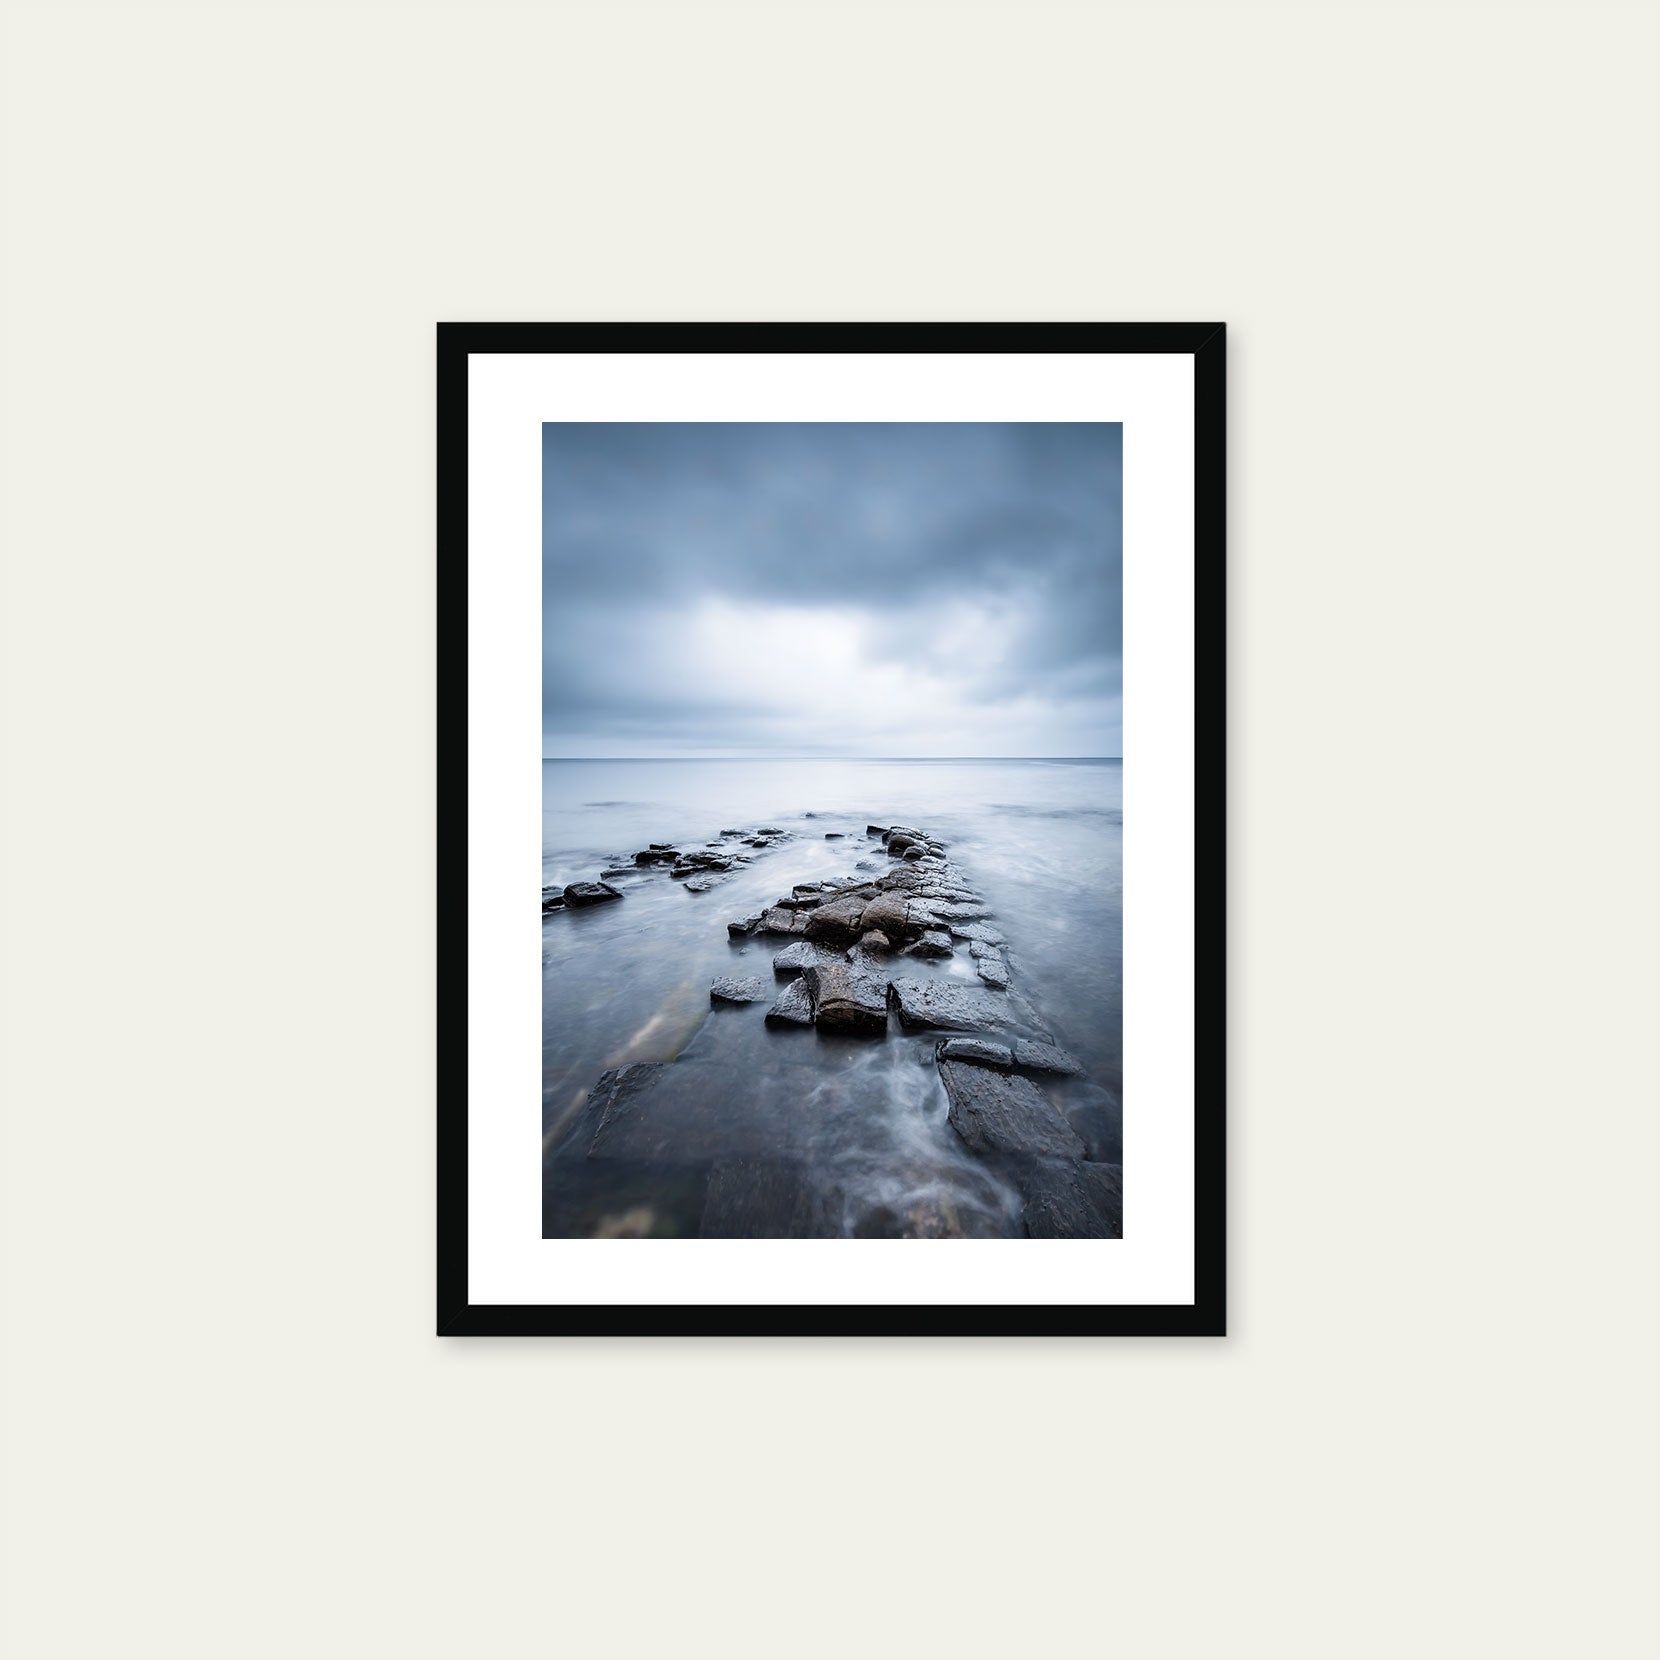 A black framed print of a moody seascape in Norway